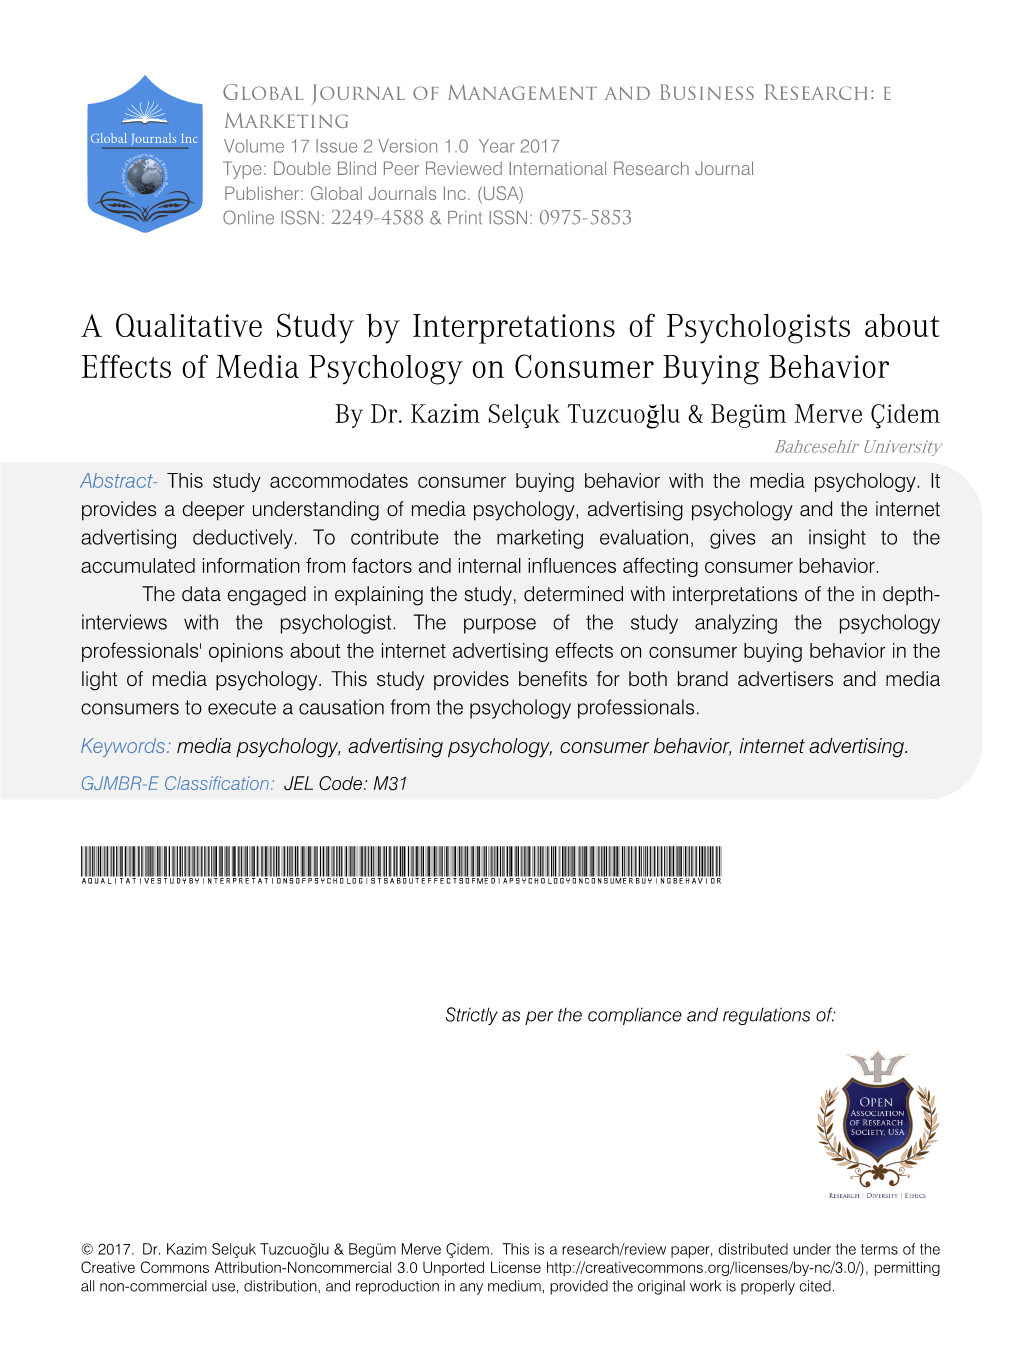 A Qualitative Study by Interpretations of Psychologists About Effects of Media Psychology on Consumer Buying Behavior by Dr